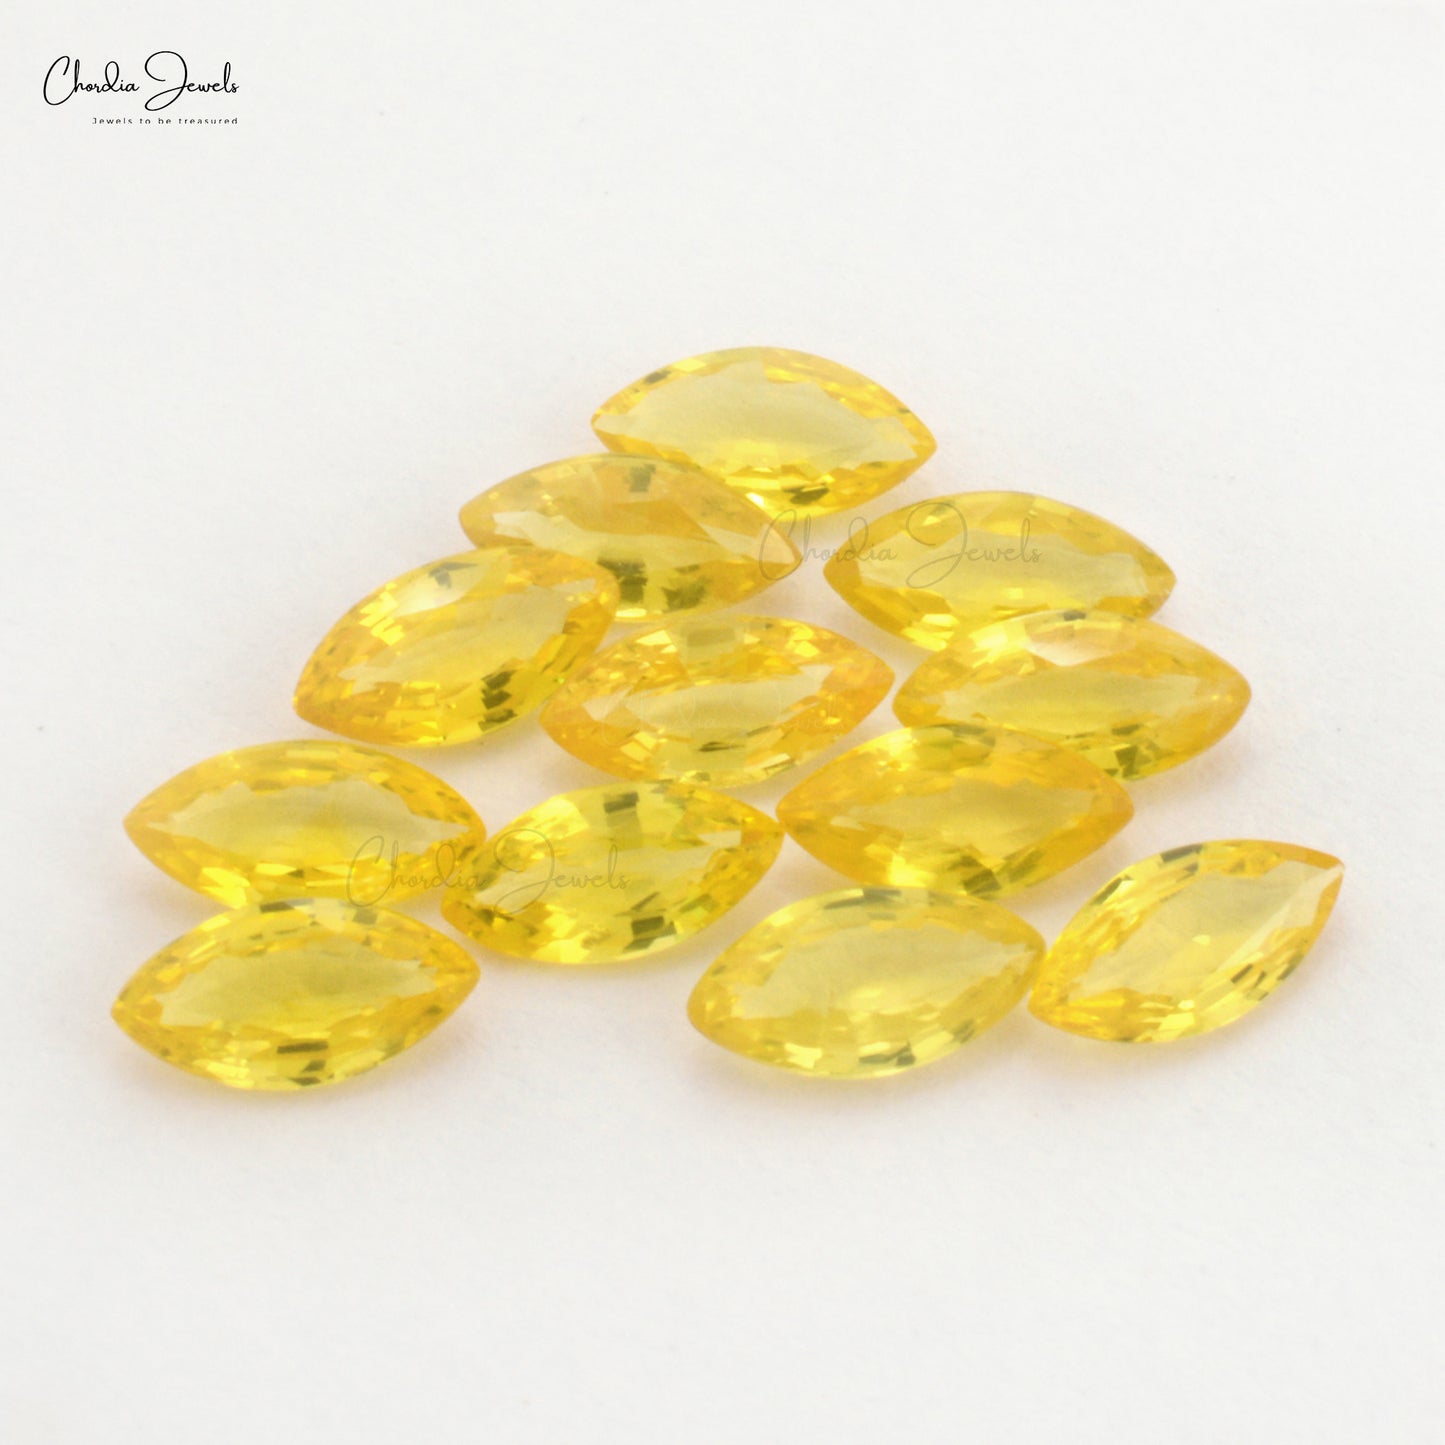 Top Quality Oval-Shape Natural Yellow Sapphire Stones. Stone Size: 6x4 mm, Stone Cut: Excellent, Stone Weight: 0.58 Carats from Chordia jewels 